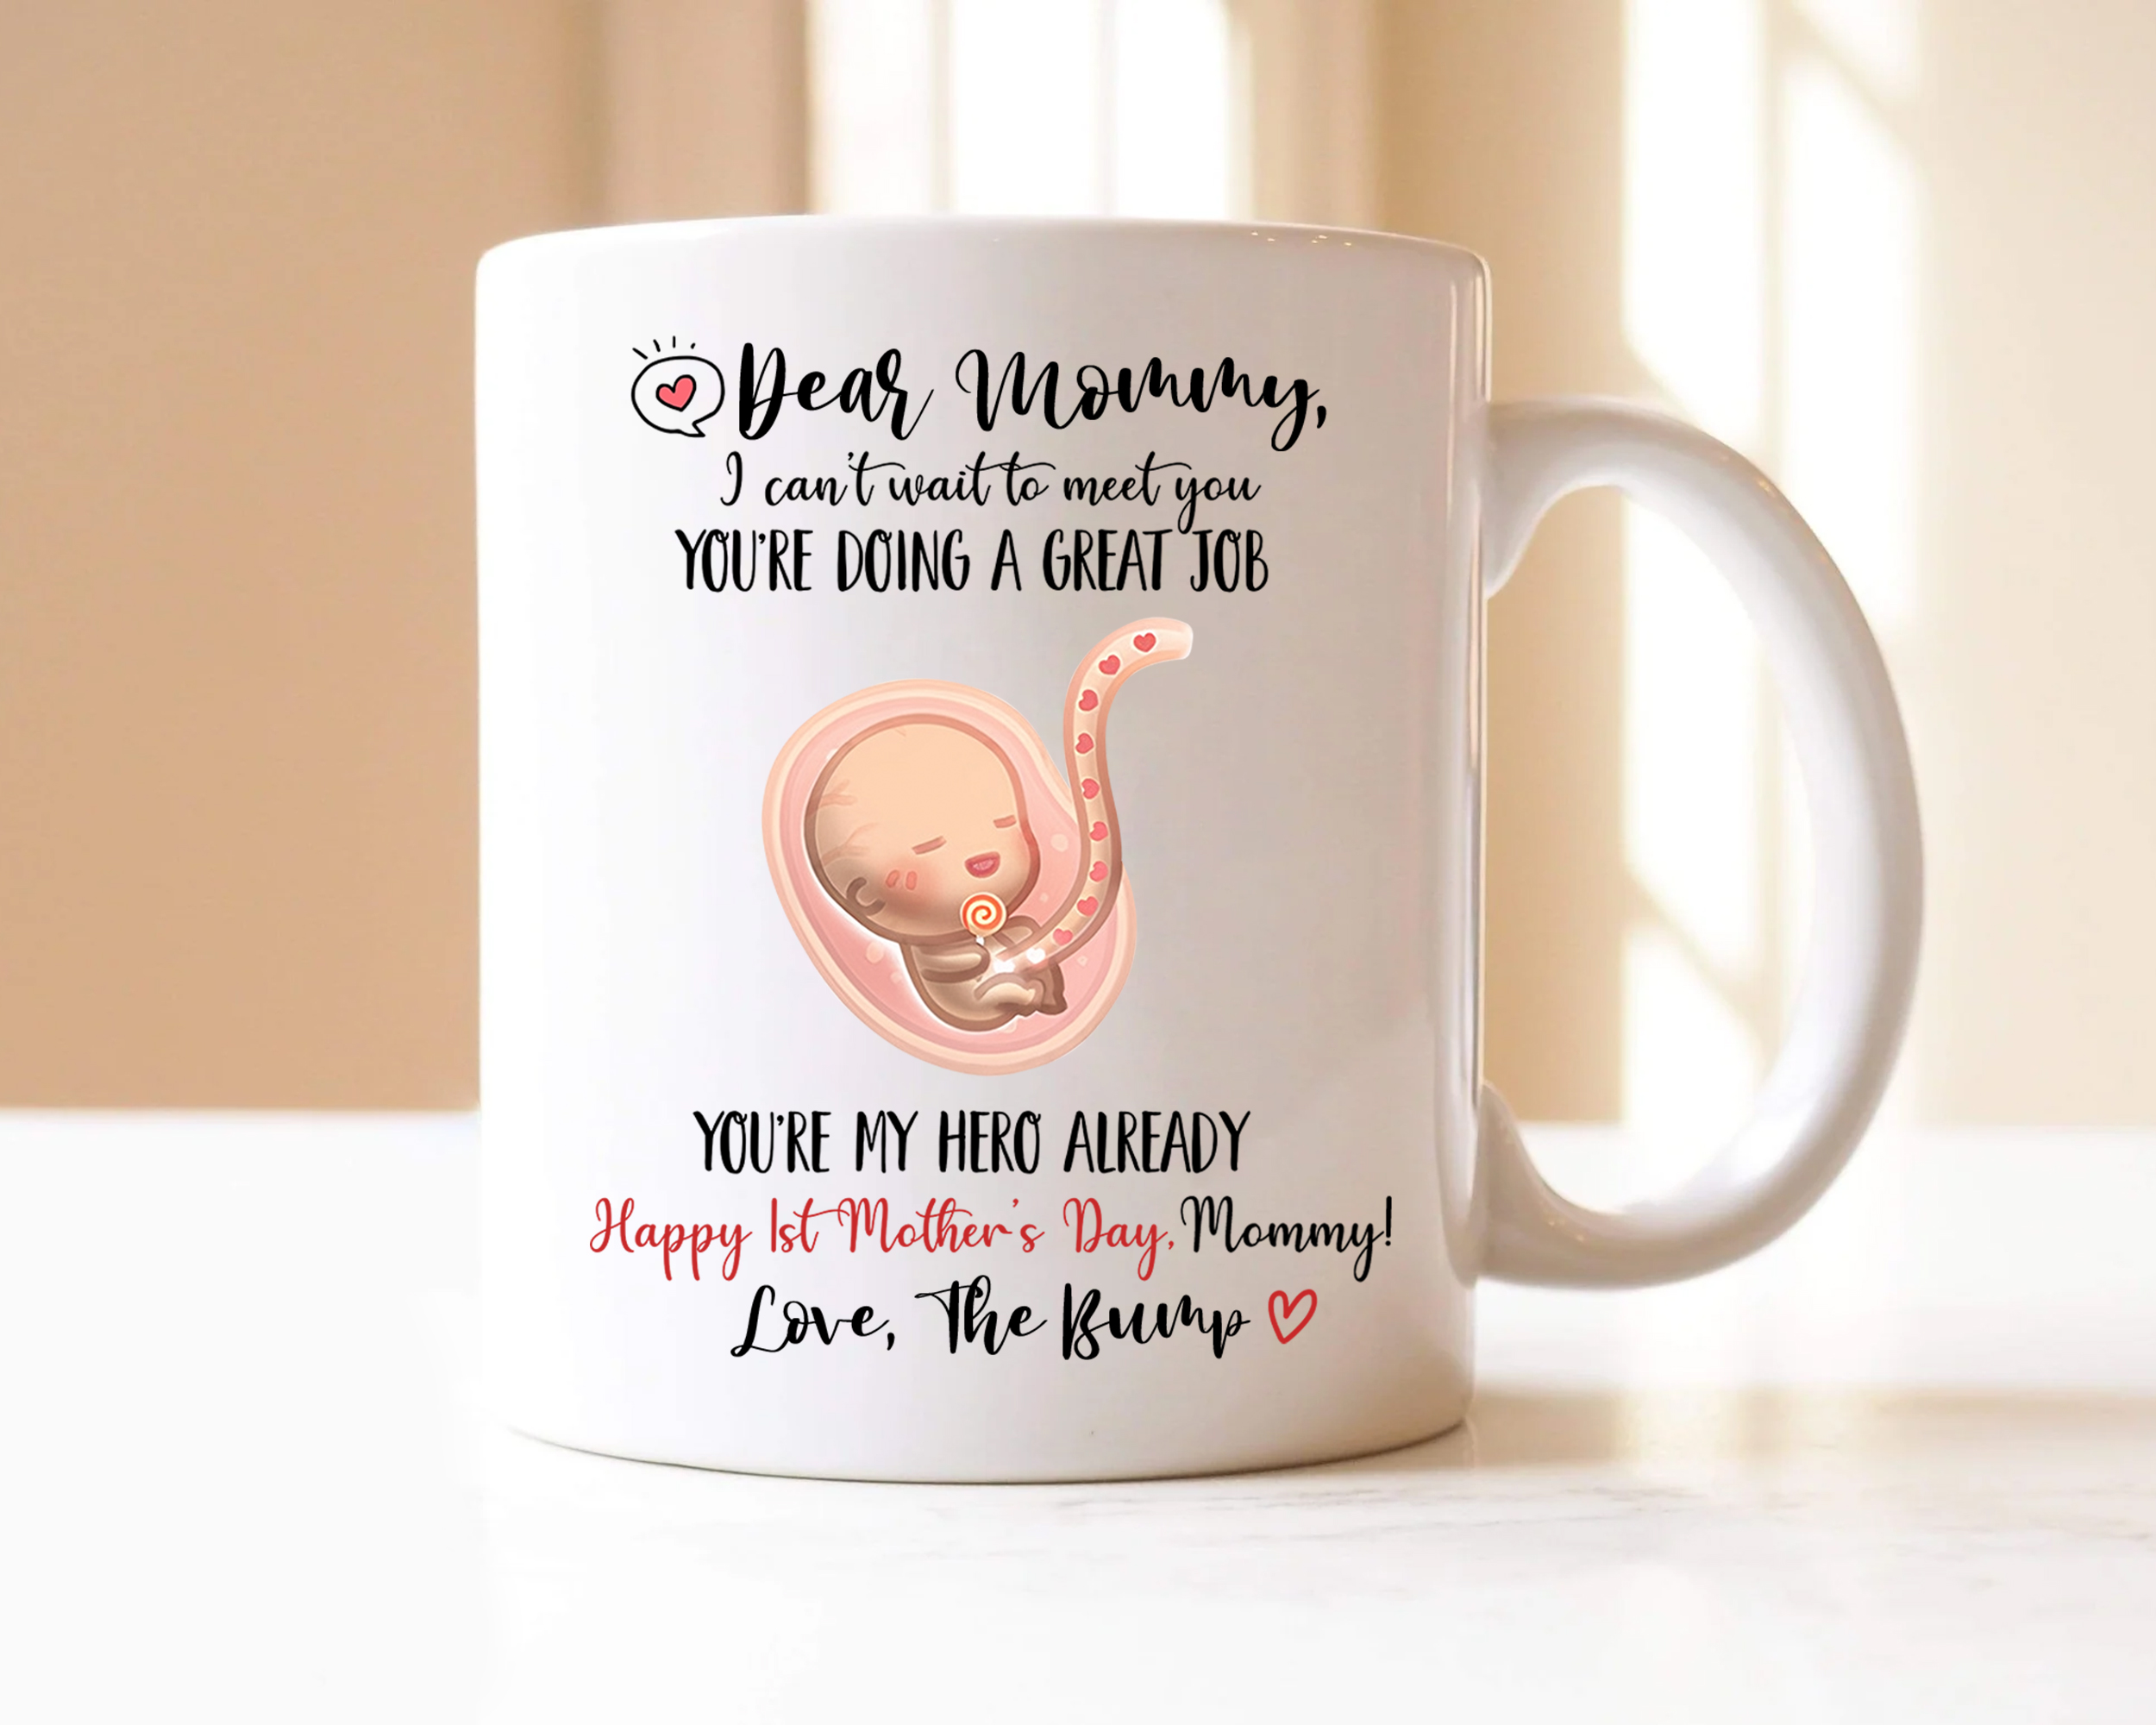 New Mom Mug Mothers Day Gift Expecting to Be New Mommy Gift Baby Shower New  Parent Gift Mom Est Year Gifts for First Time Moms 